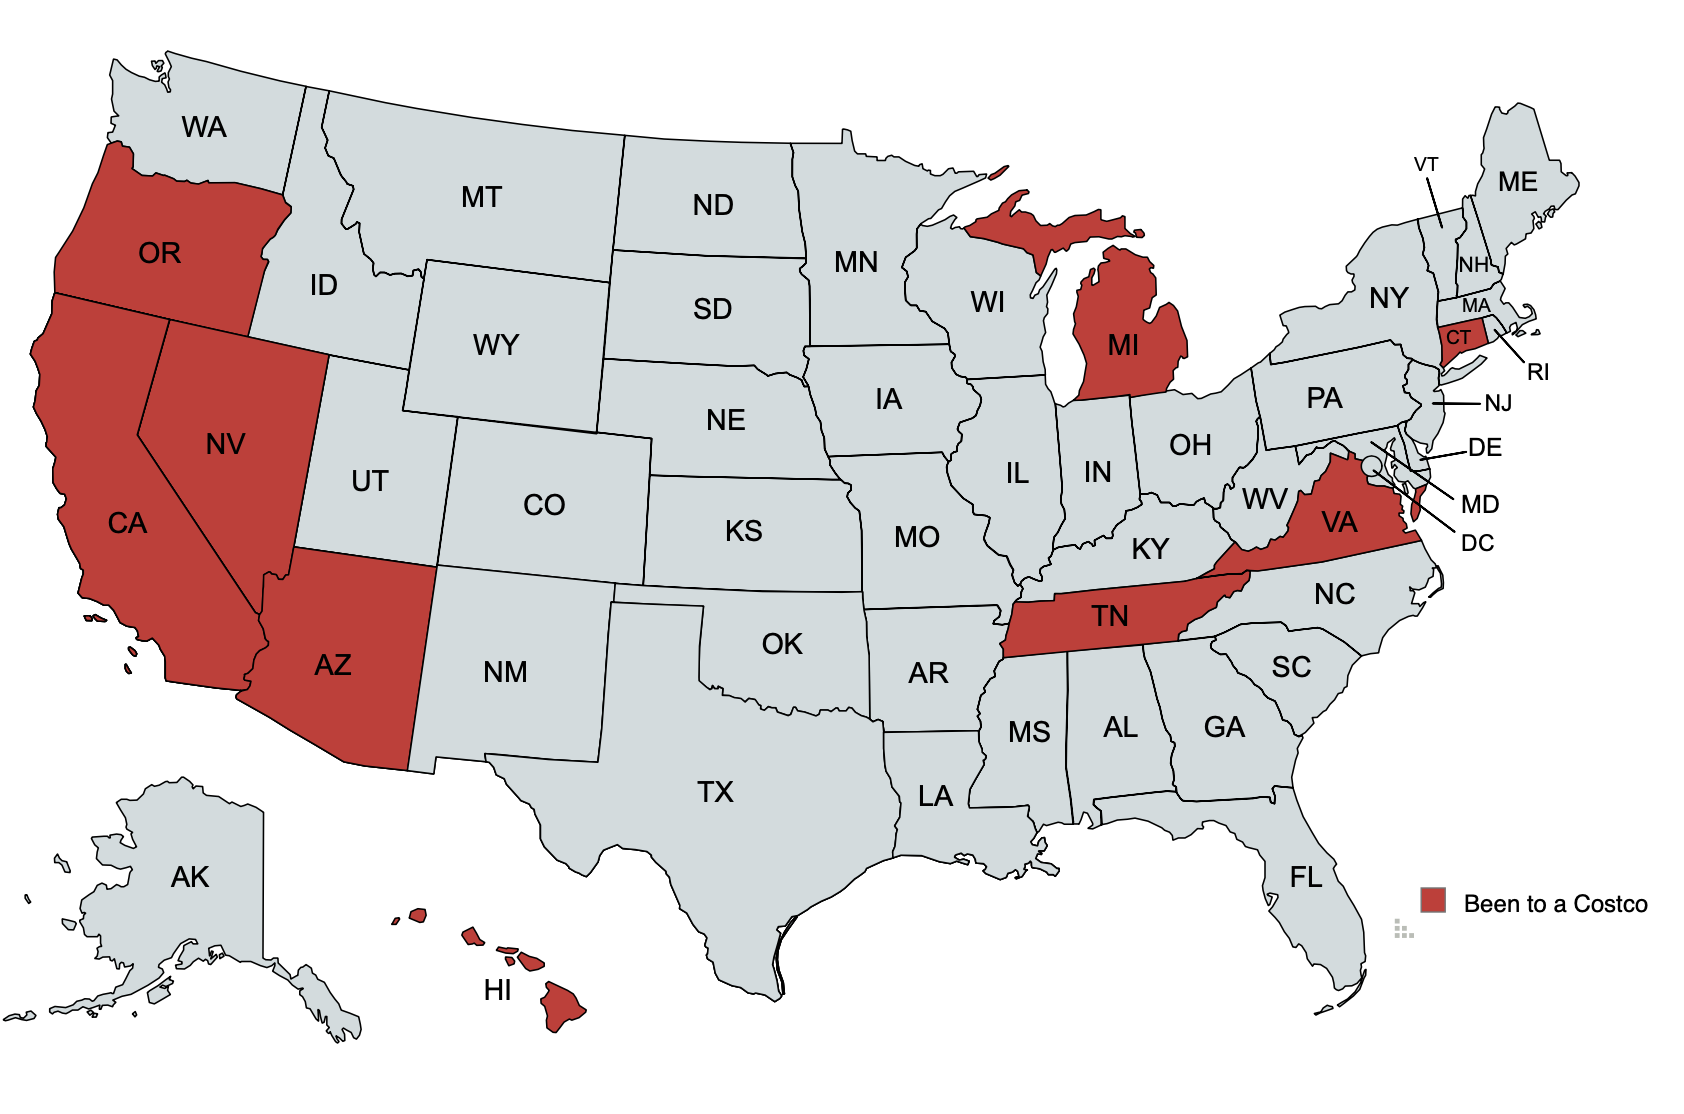 These are the states in which I've been to a Costco.